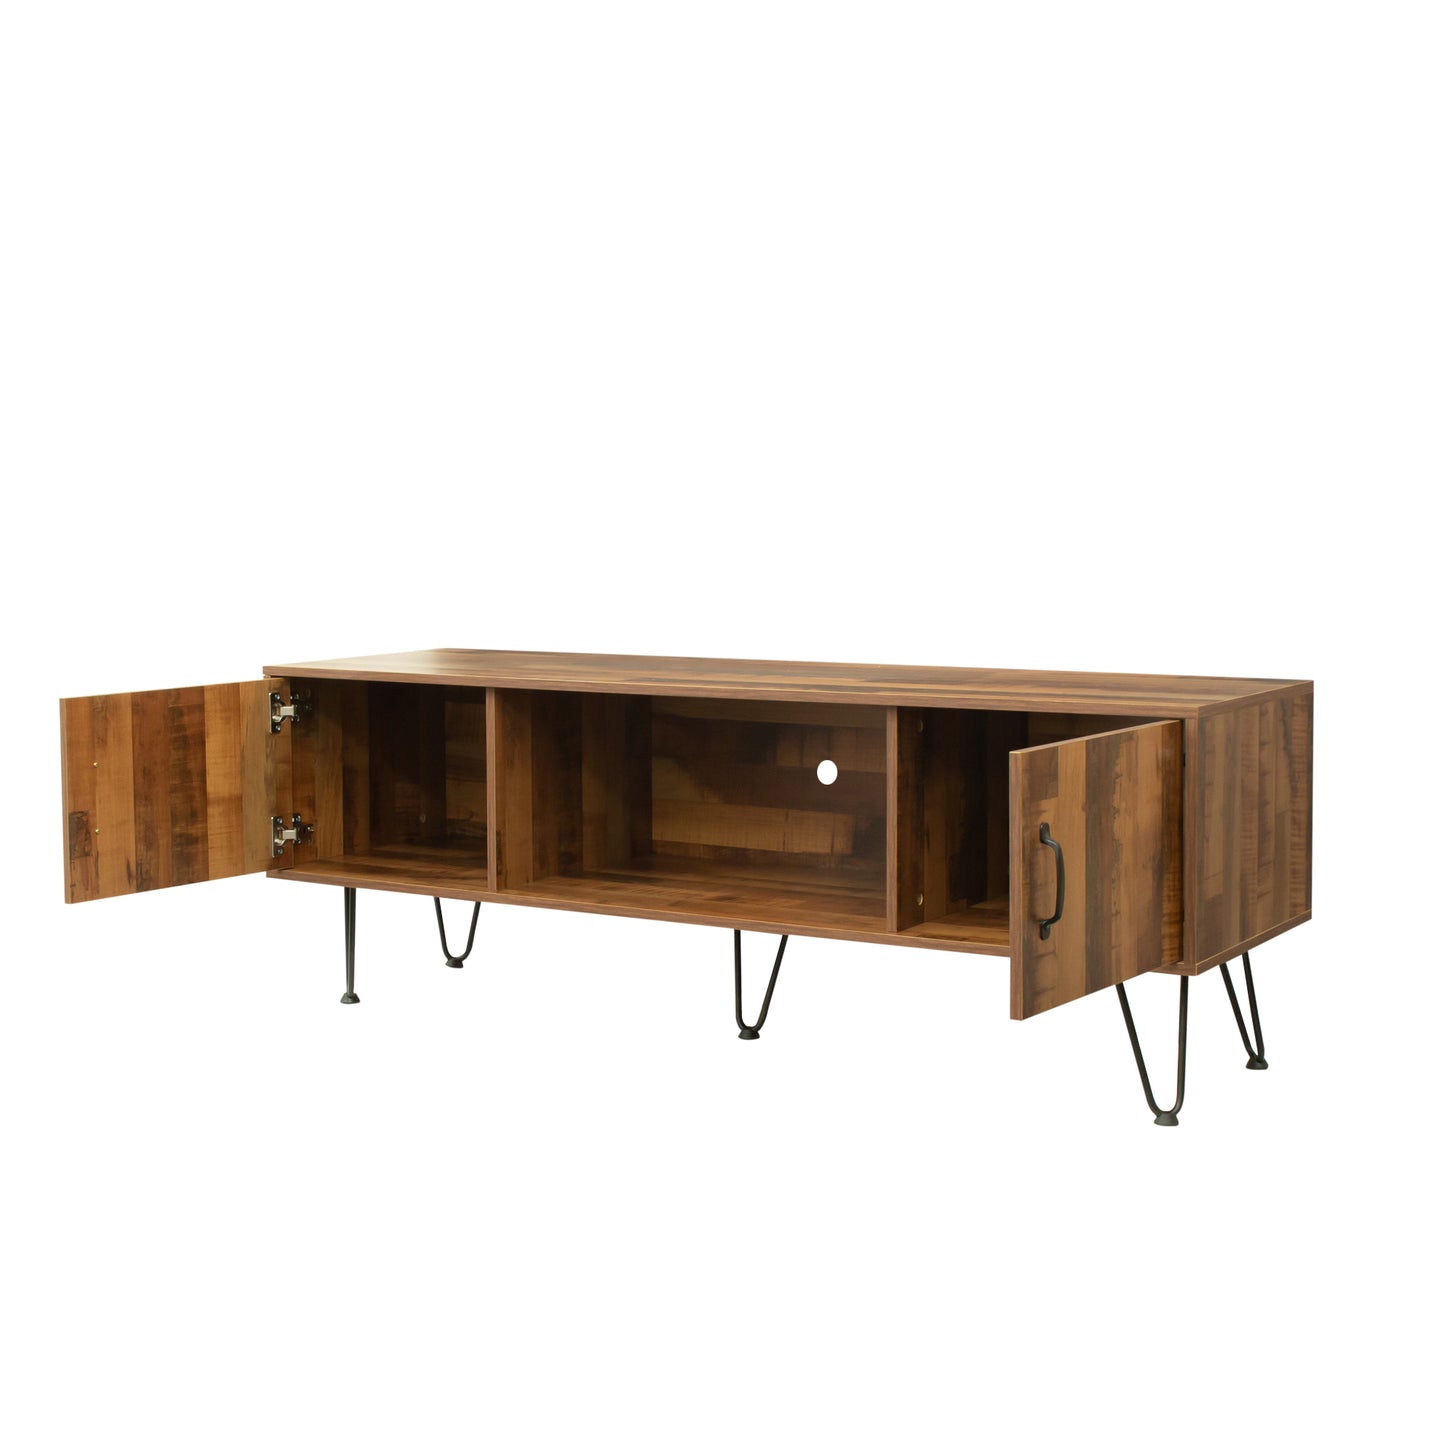 TV Media Stand, 60 inch Wide, Modern Industrial, Living Room Entertainment Center, Storage Shelves and Cabinets, for Flat Screen TVs up to 65 inches in Natural